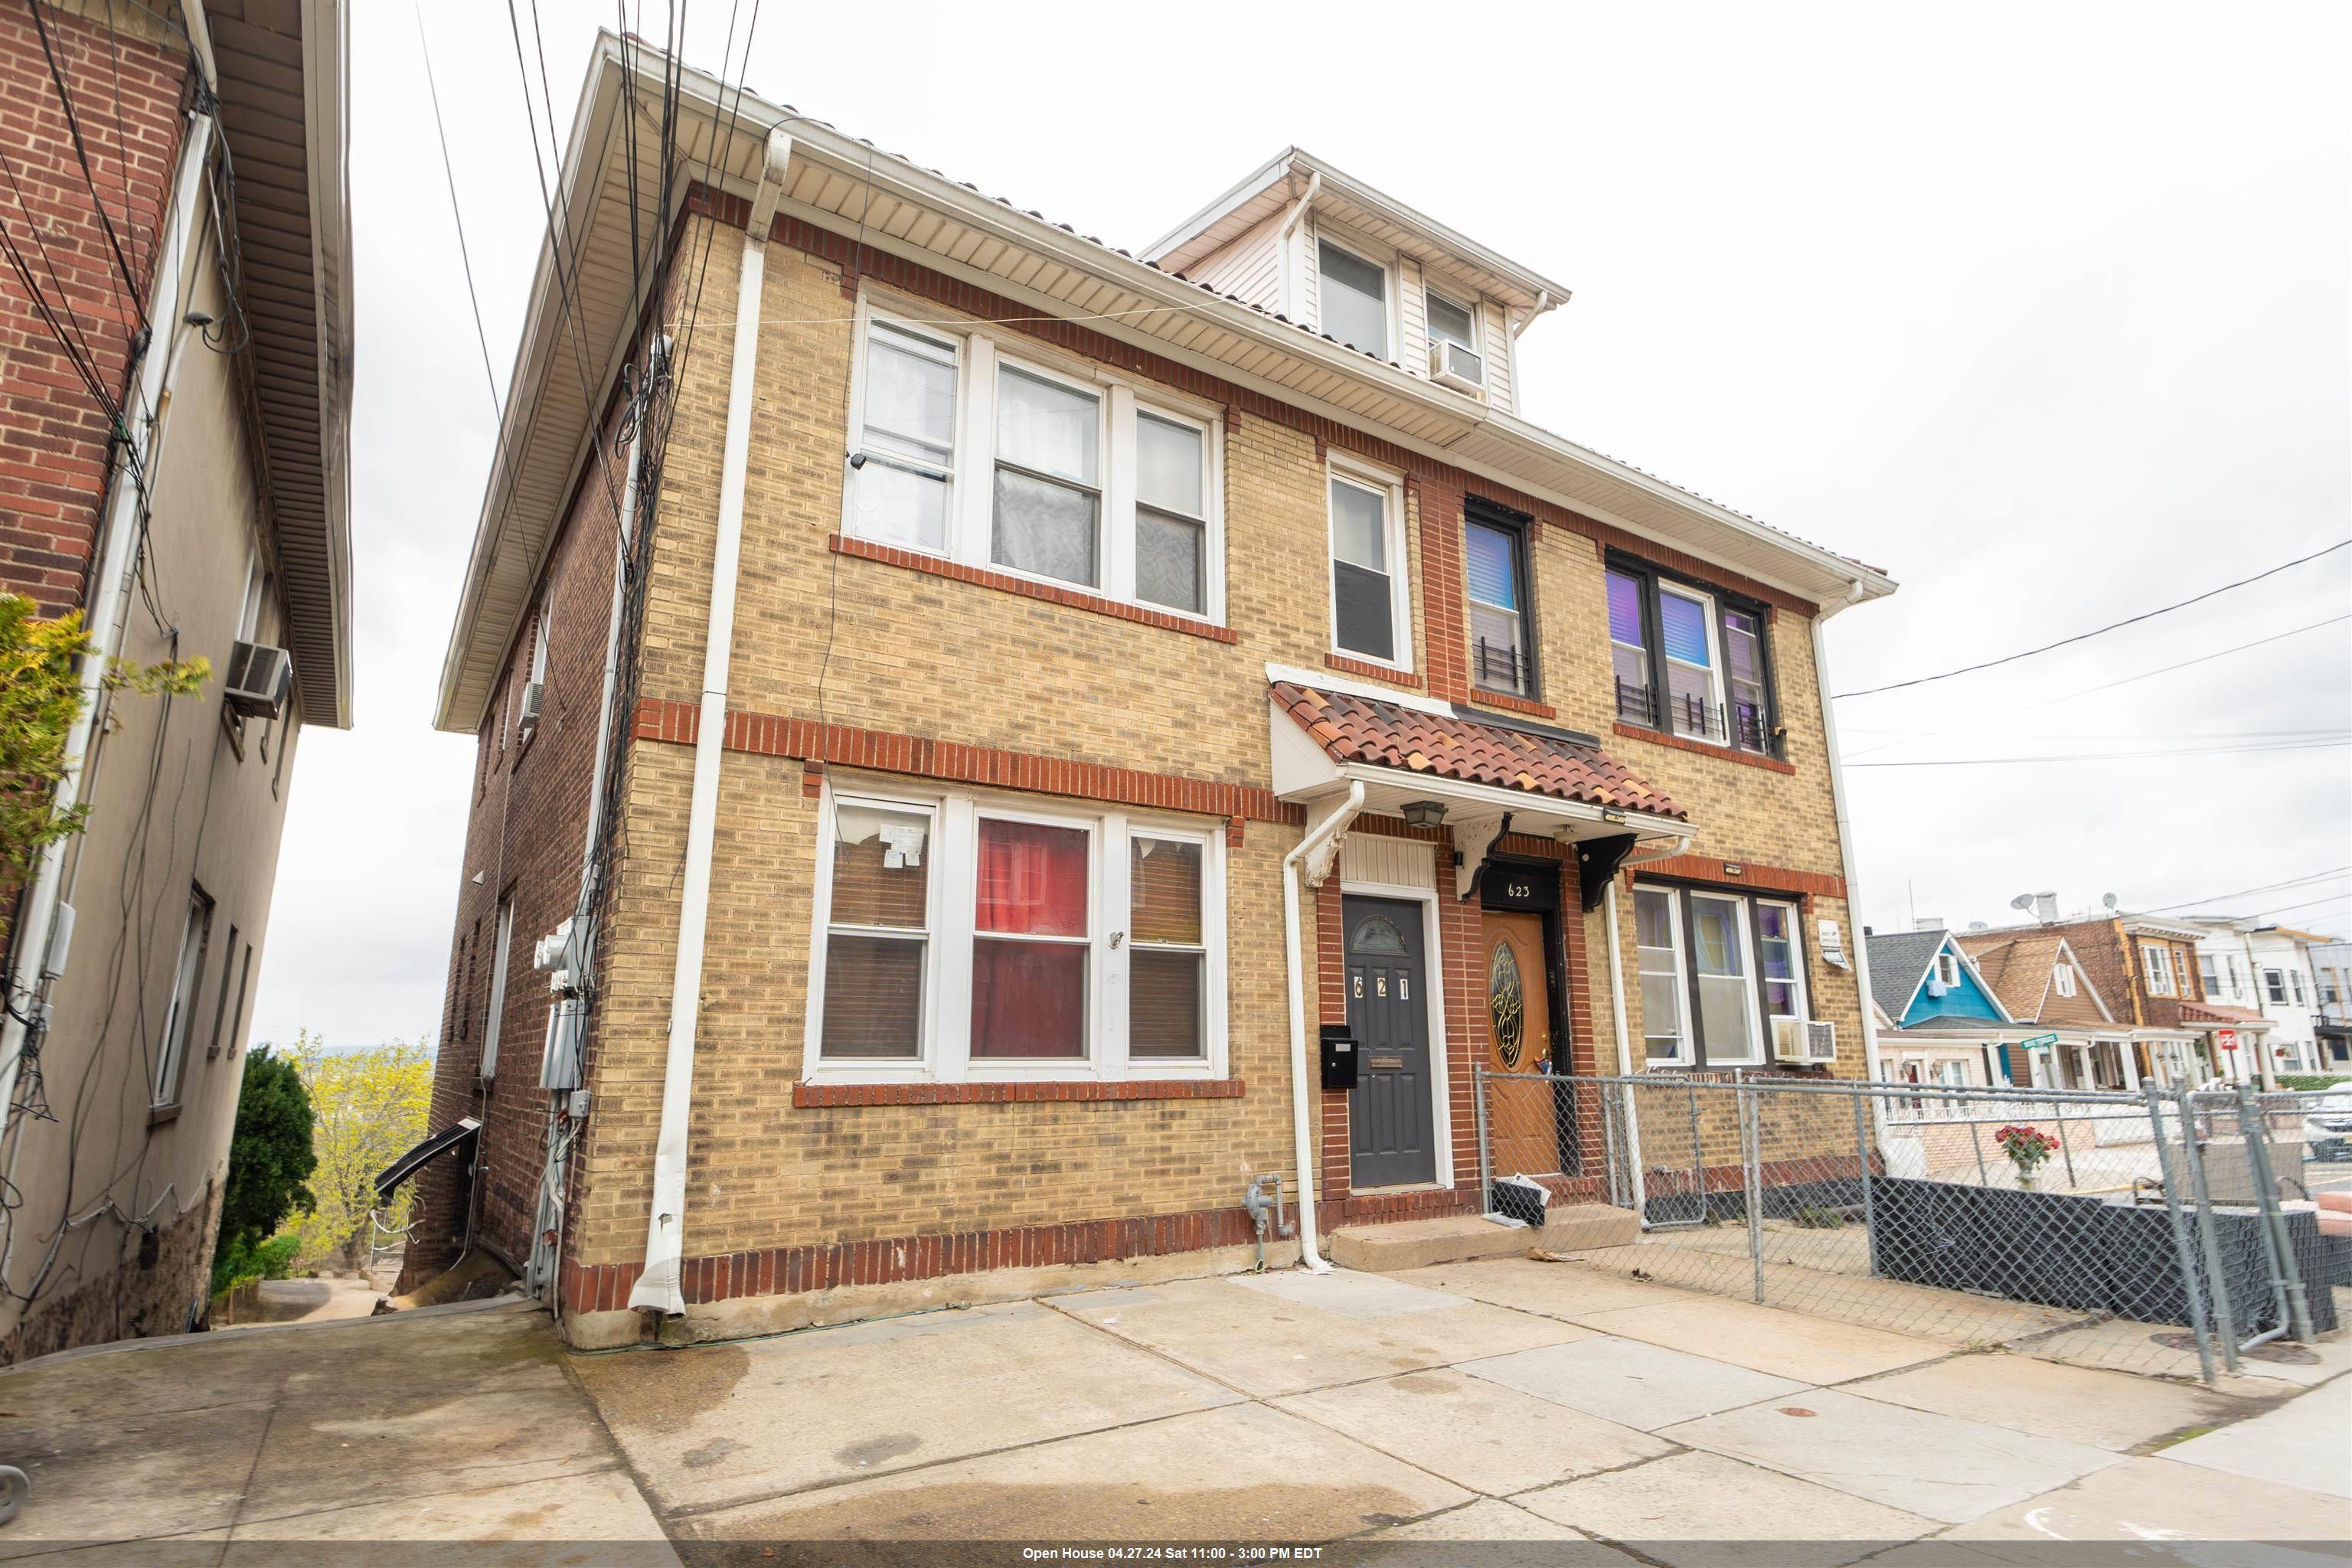 621 COLUMBIA AVE Multi-Family New Jersey